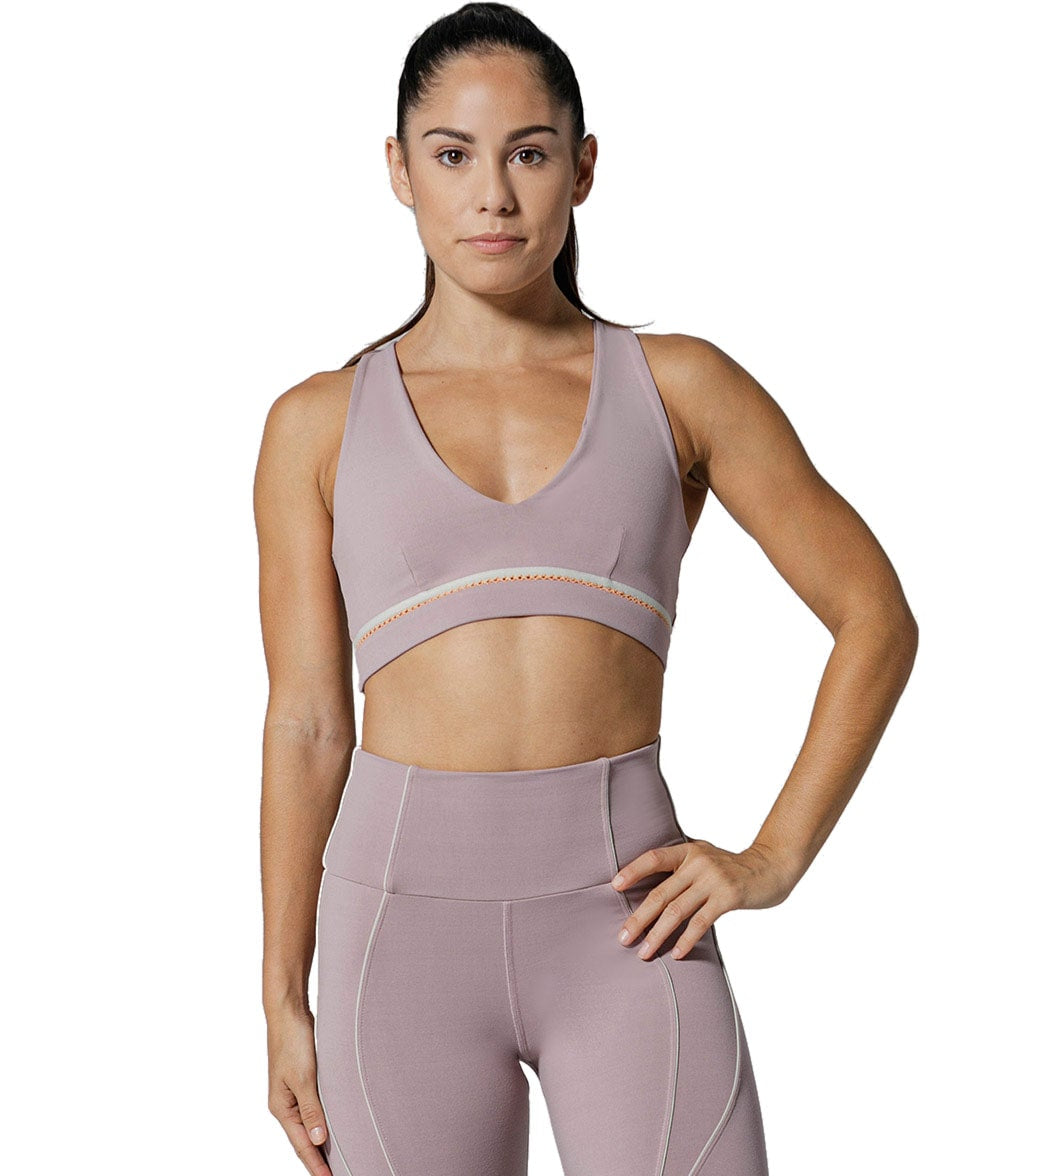 Wickable Anti-Bacterial Stretch Fabric - stay dry - Bra-Makers Supply